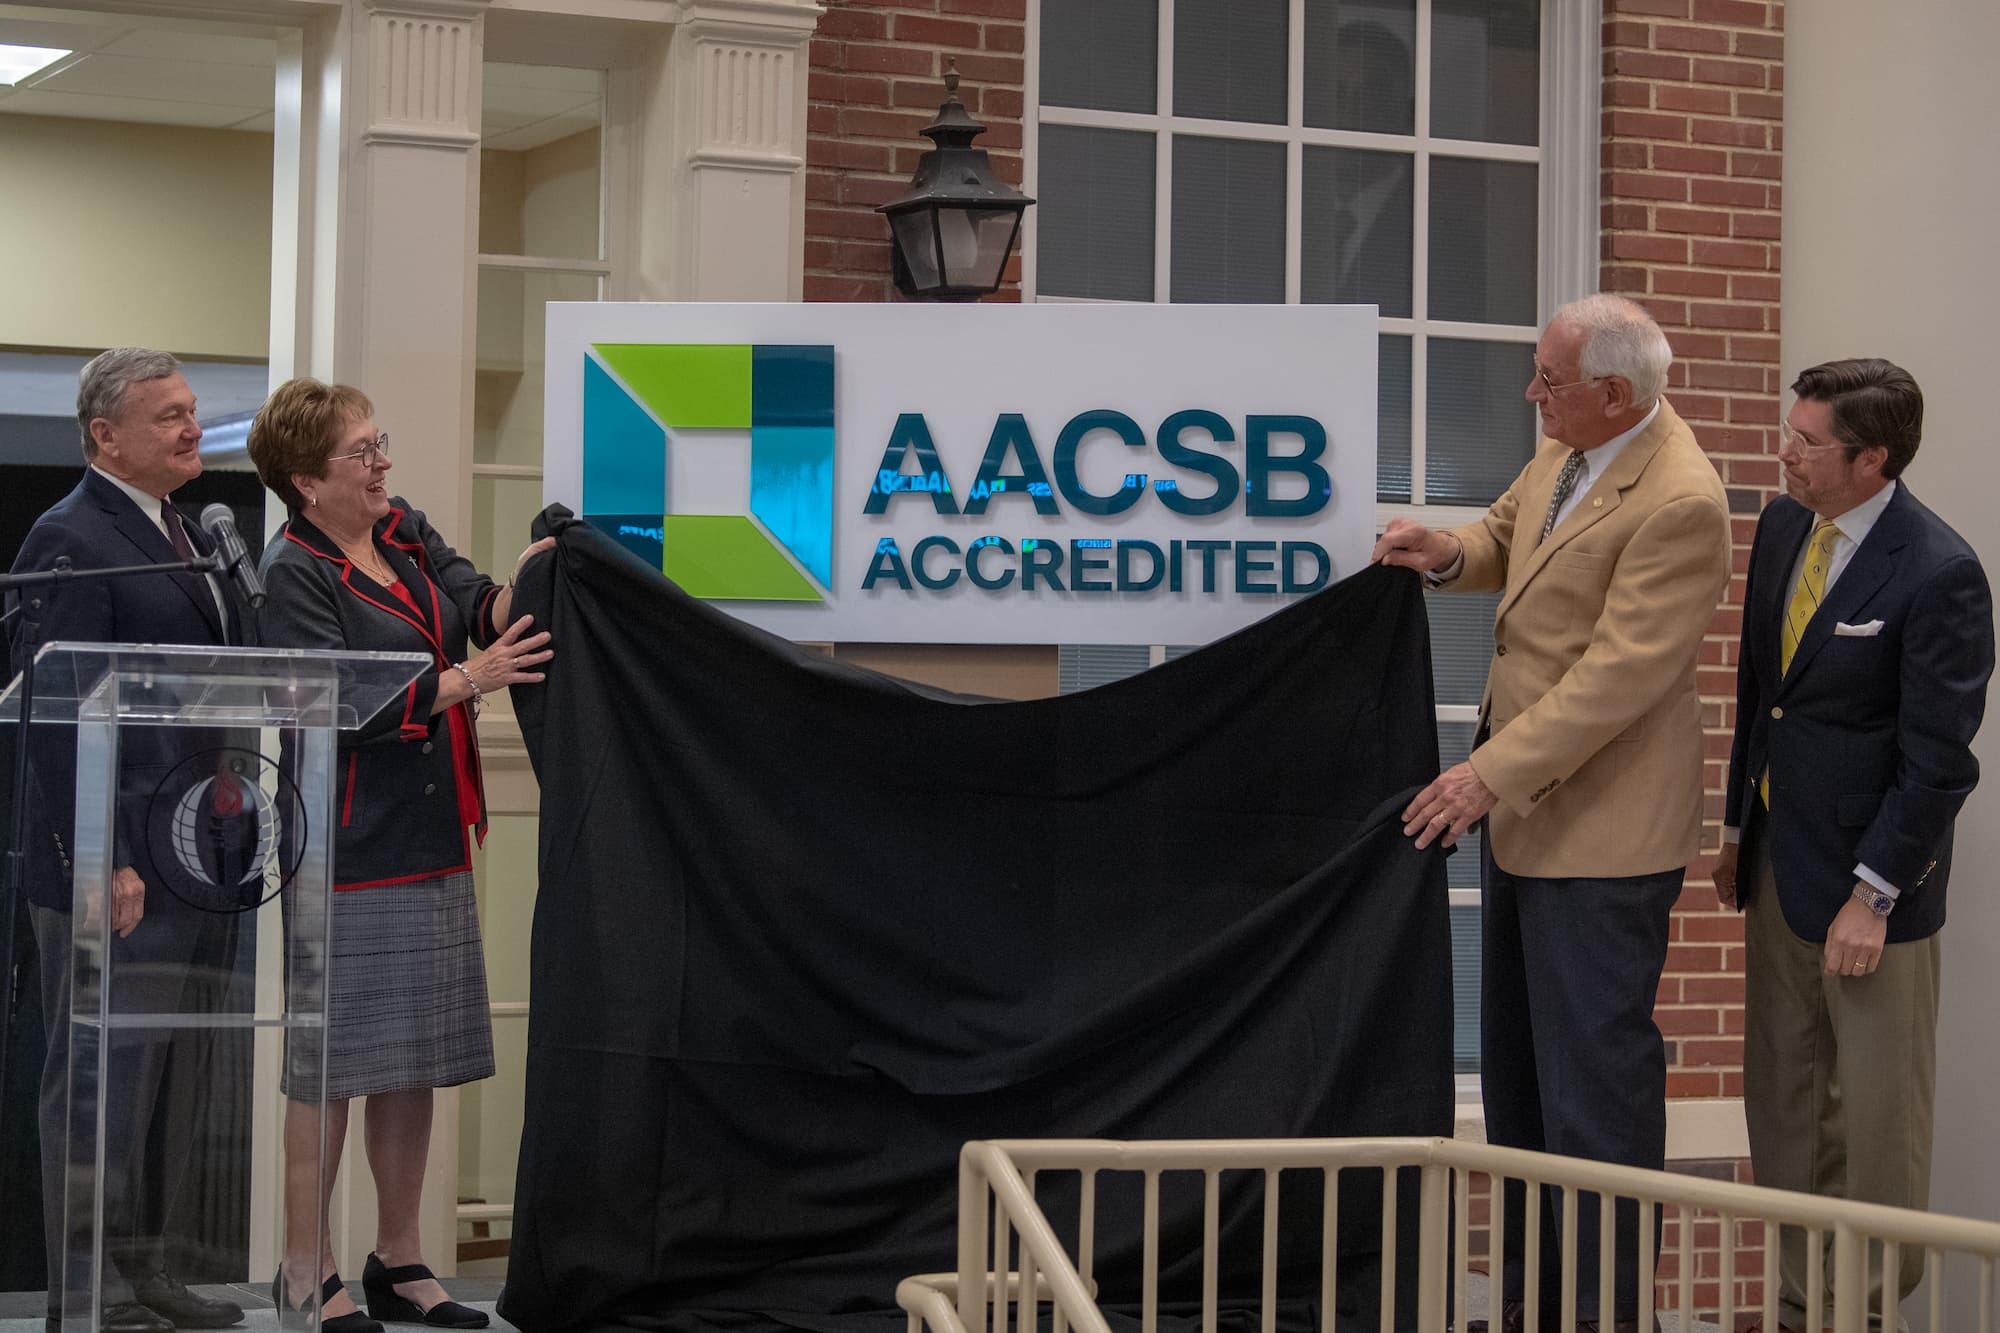 Dr. Earl Ingram, Karen Carter, Dr. Jack Hawkins, Jr. and Dr. Judson Edwards unveil a sign noting the AACSB Accreditation of the Sorrell College of Business